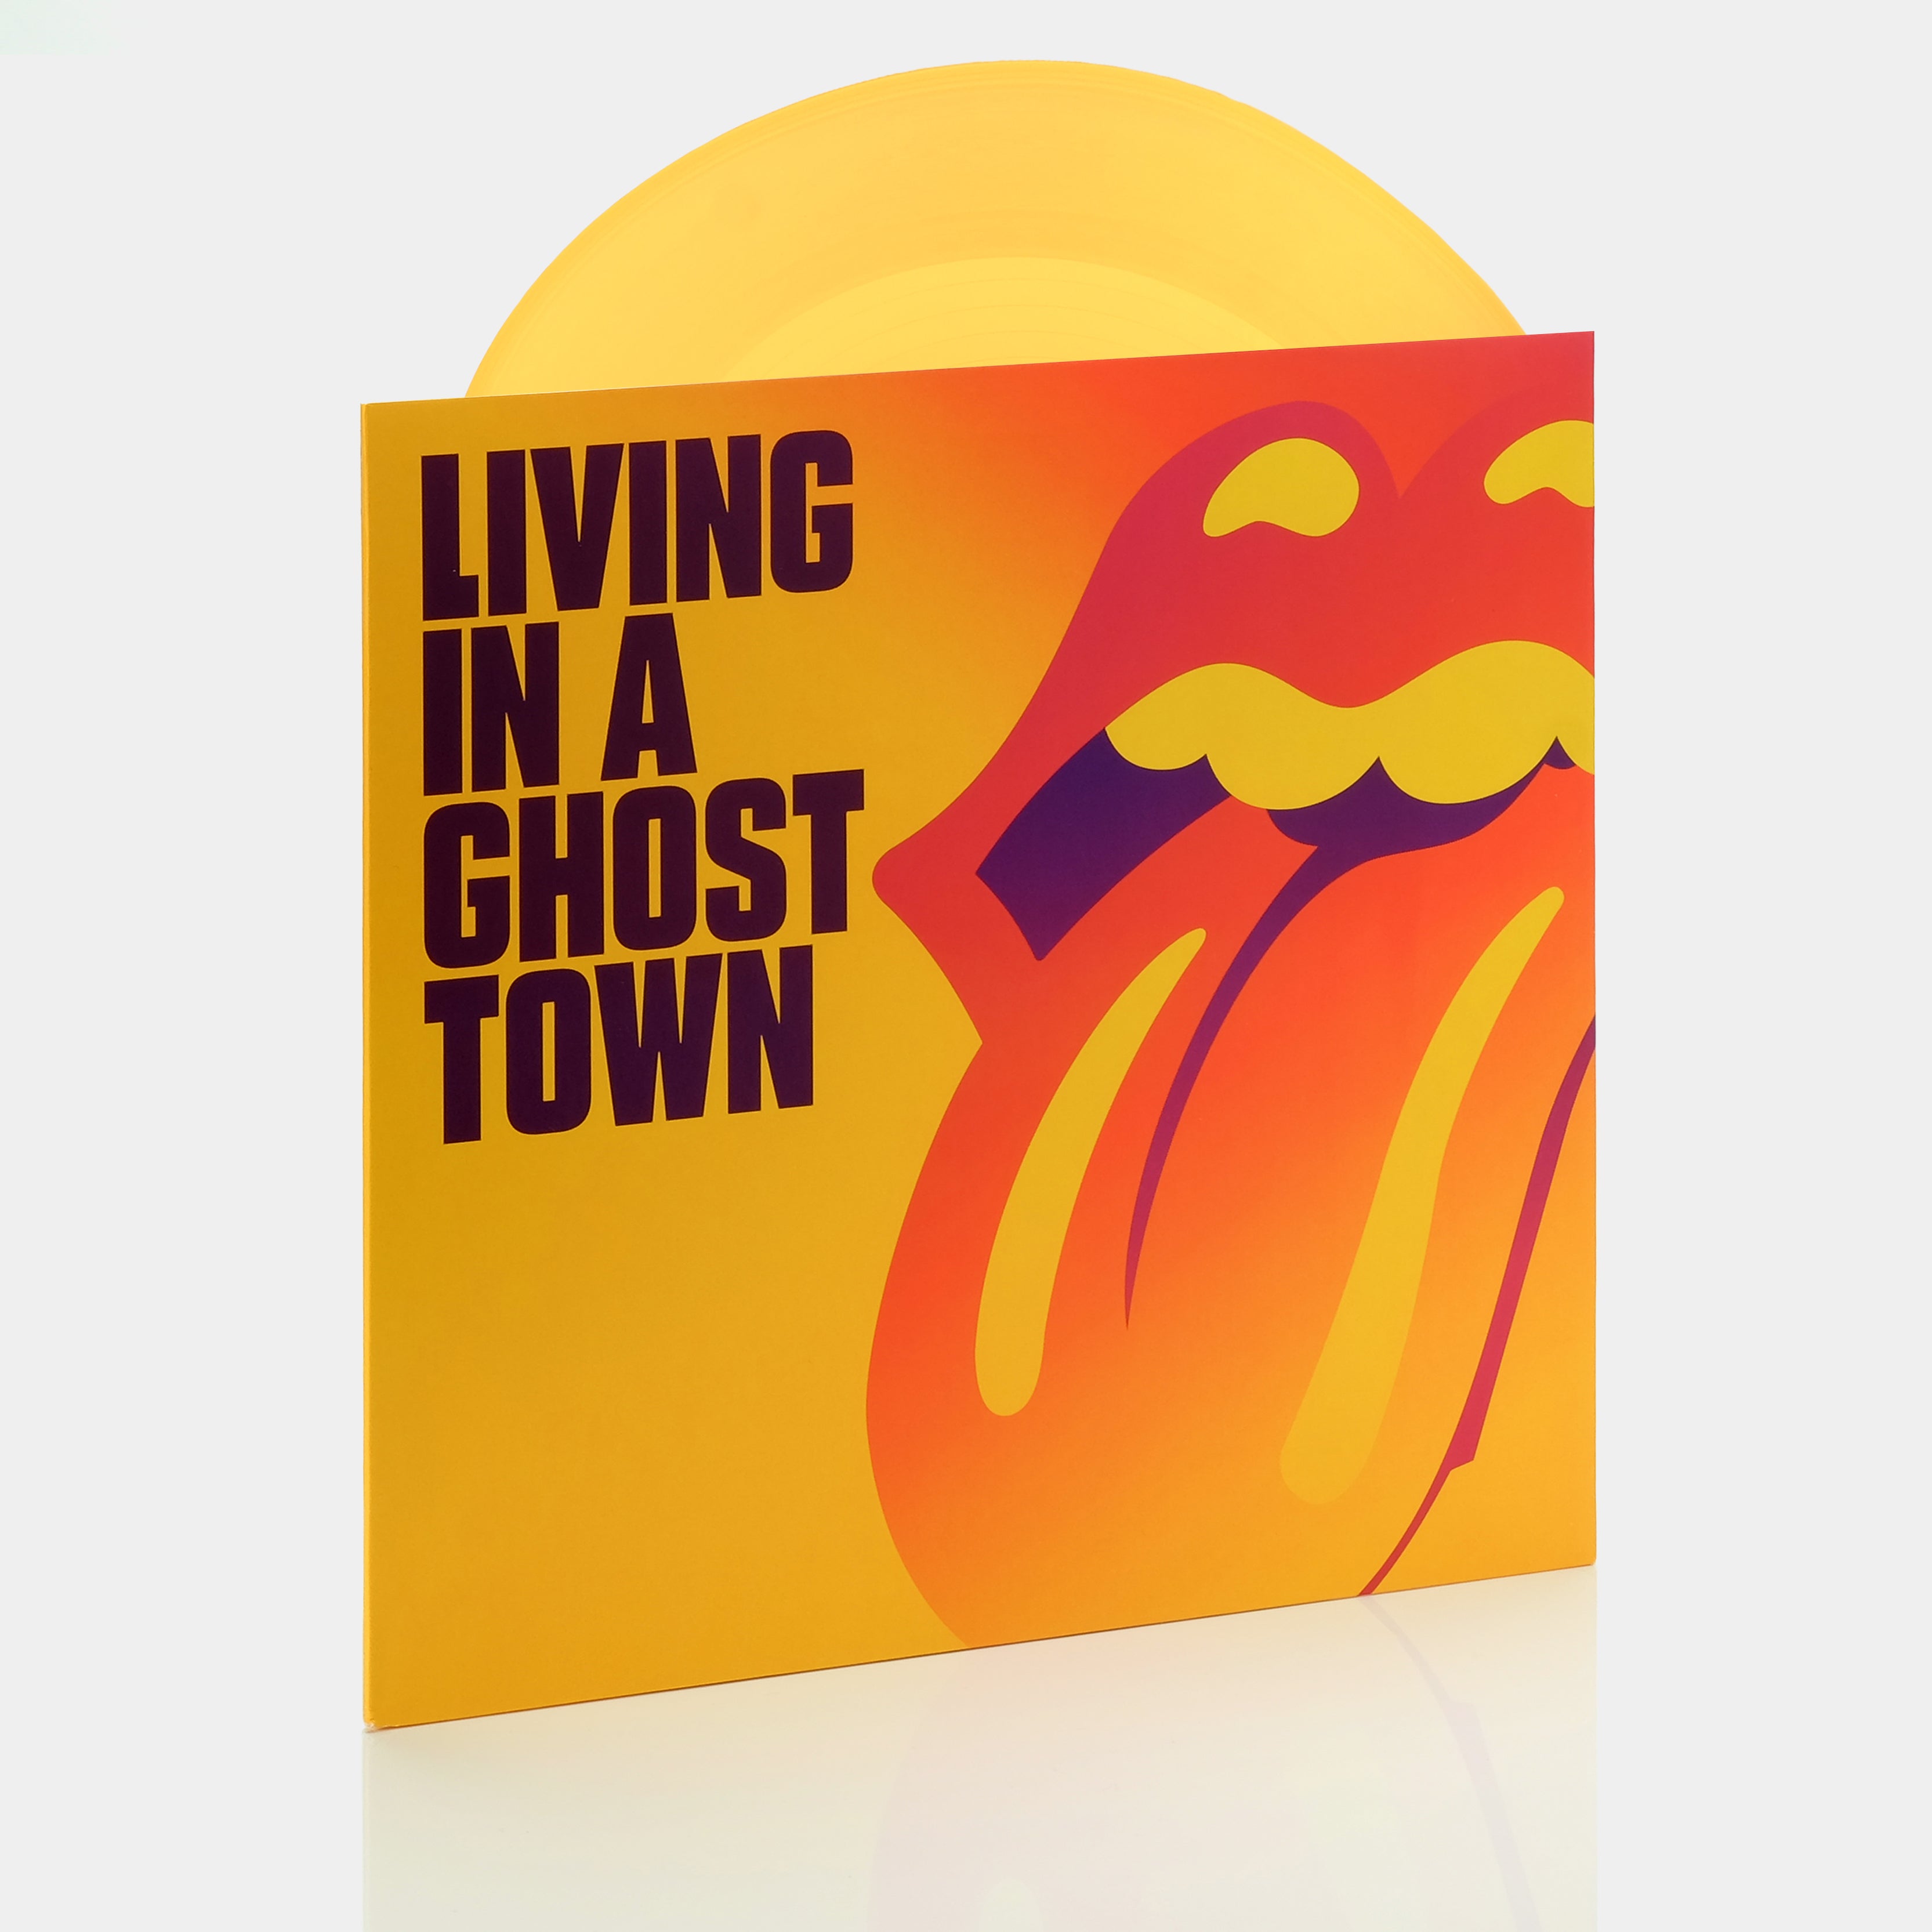 The Rolling Stones - Living In A Ghost Town 10" Single Orange Vinyl Record